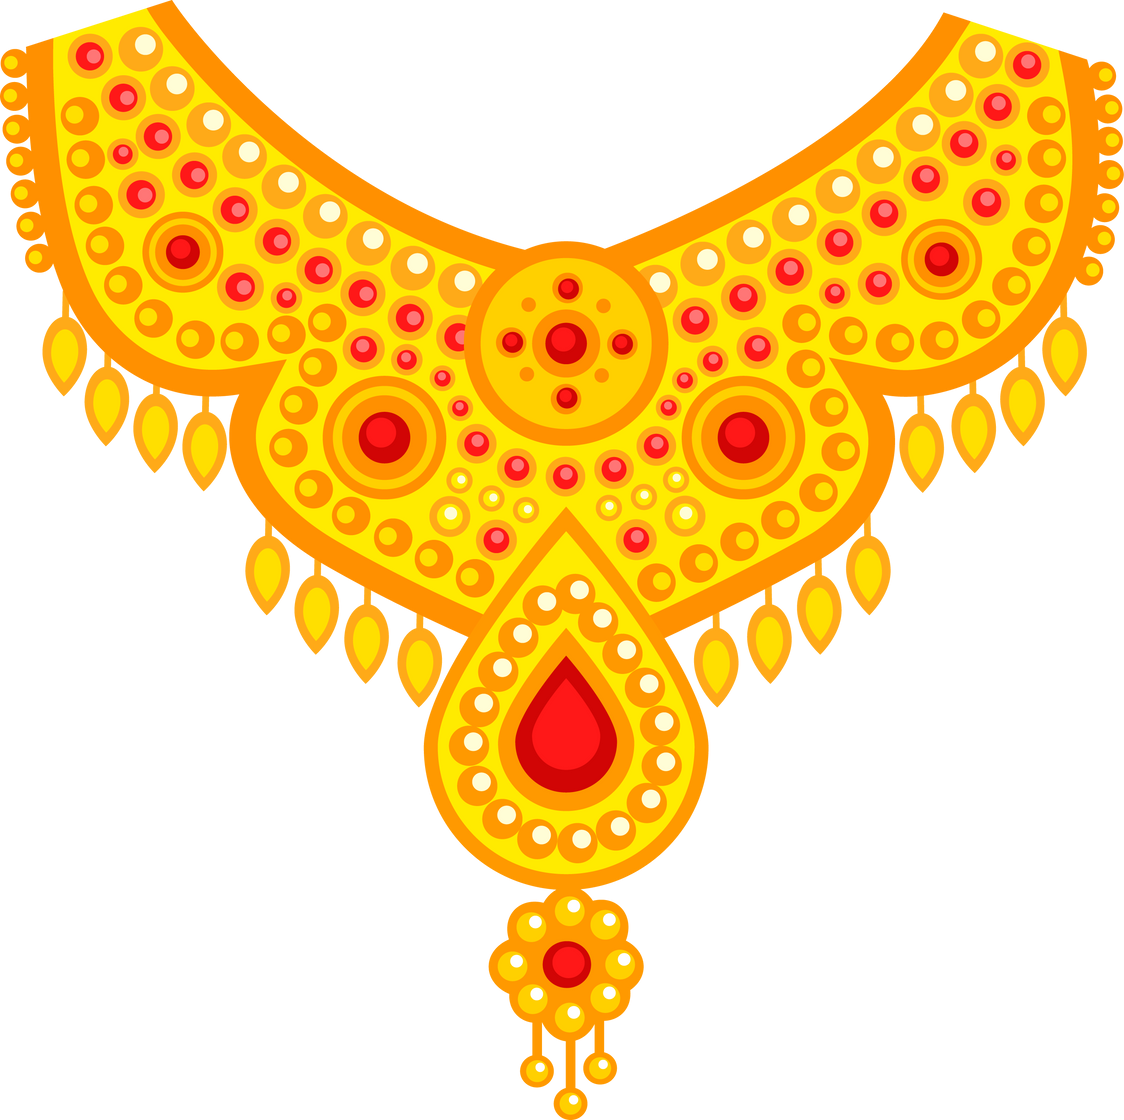 Golden jewelry necklace illustration.